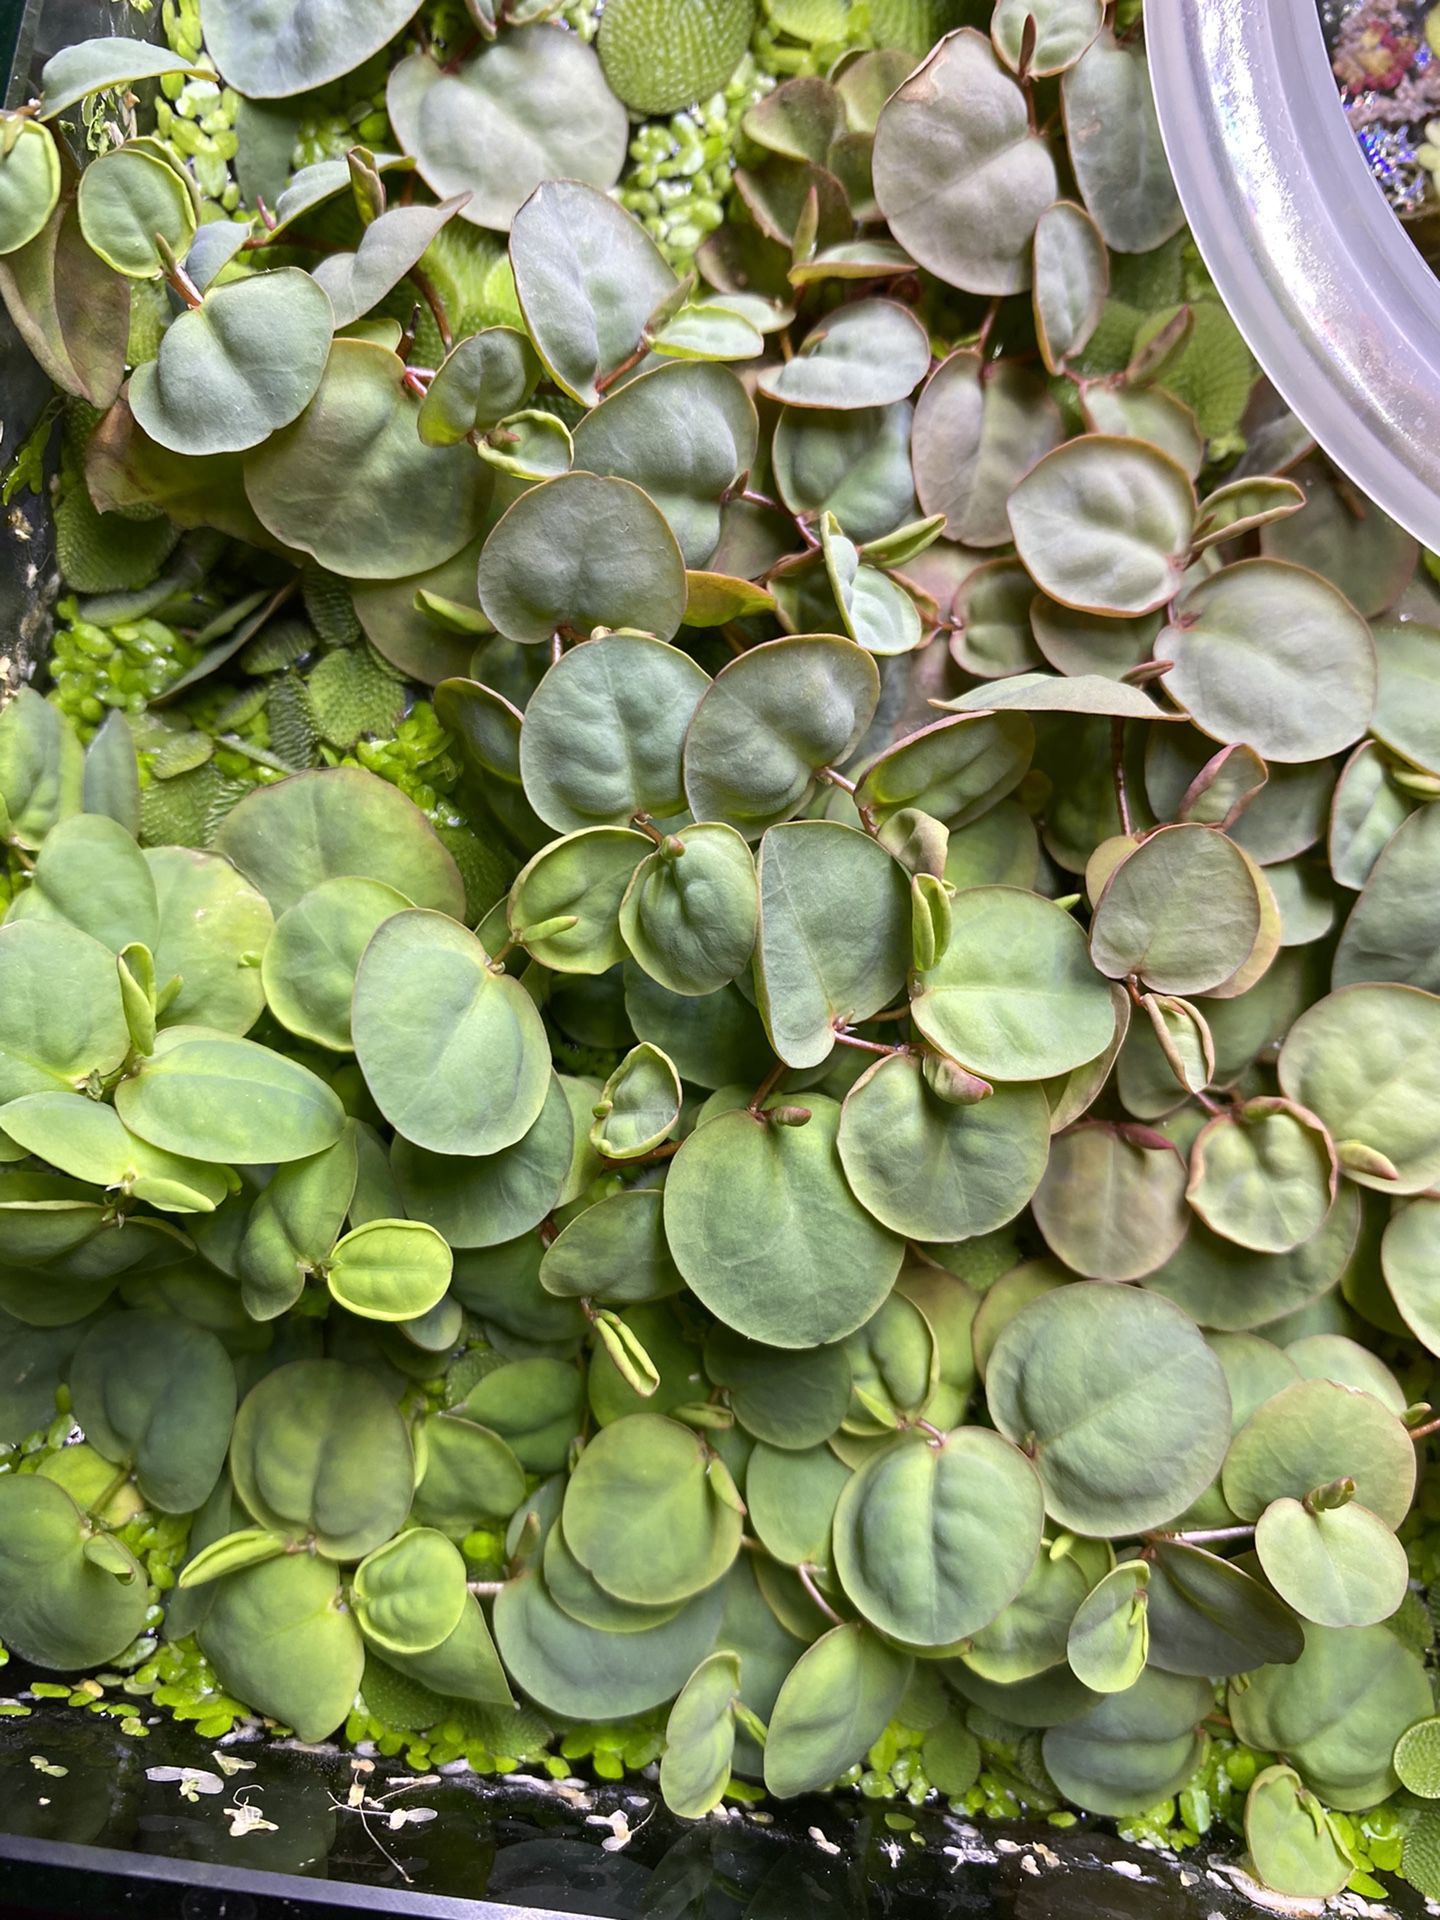 Red Root floaters, Salvinia Minima, Duckweed, Flame Moss and Fissidens Fontanus pads, Ramshorn Snail, Malaysian Trumpet Snails